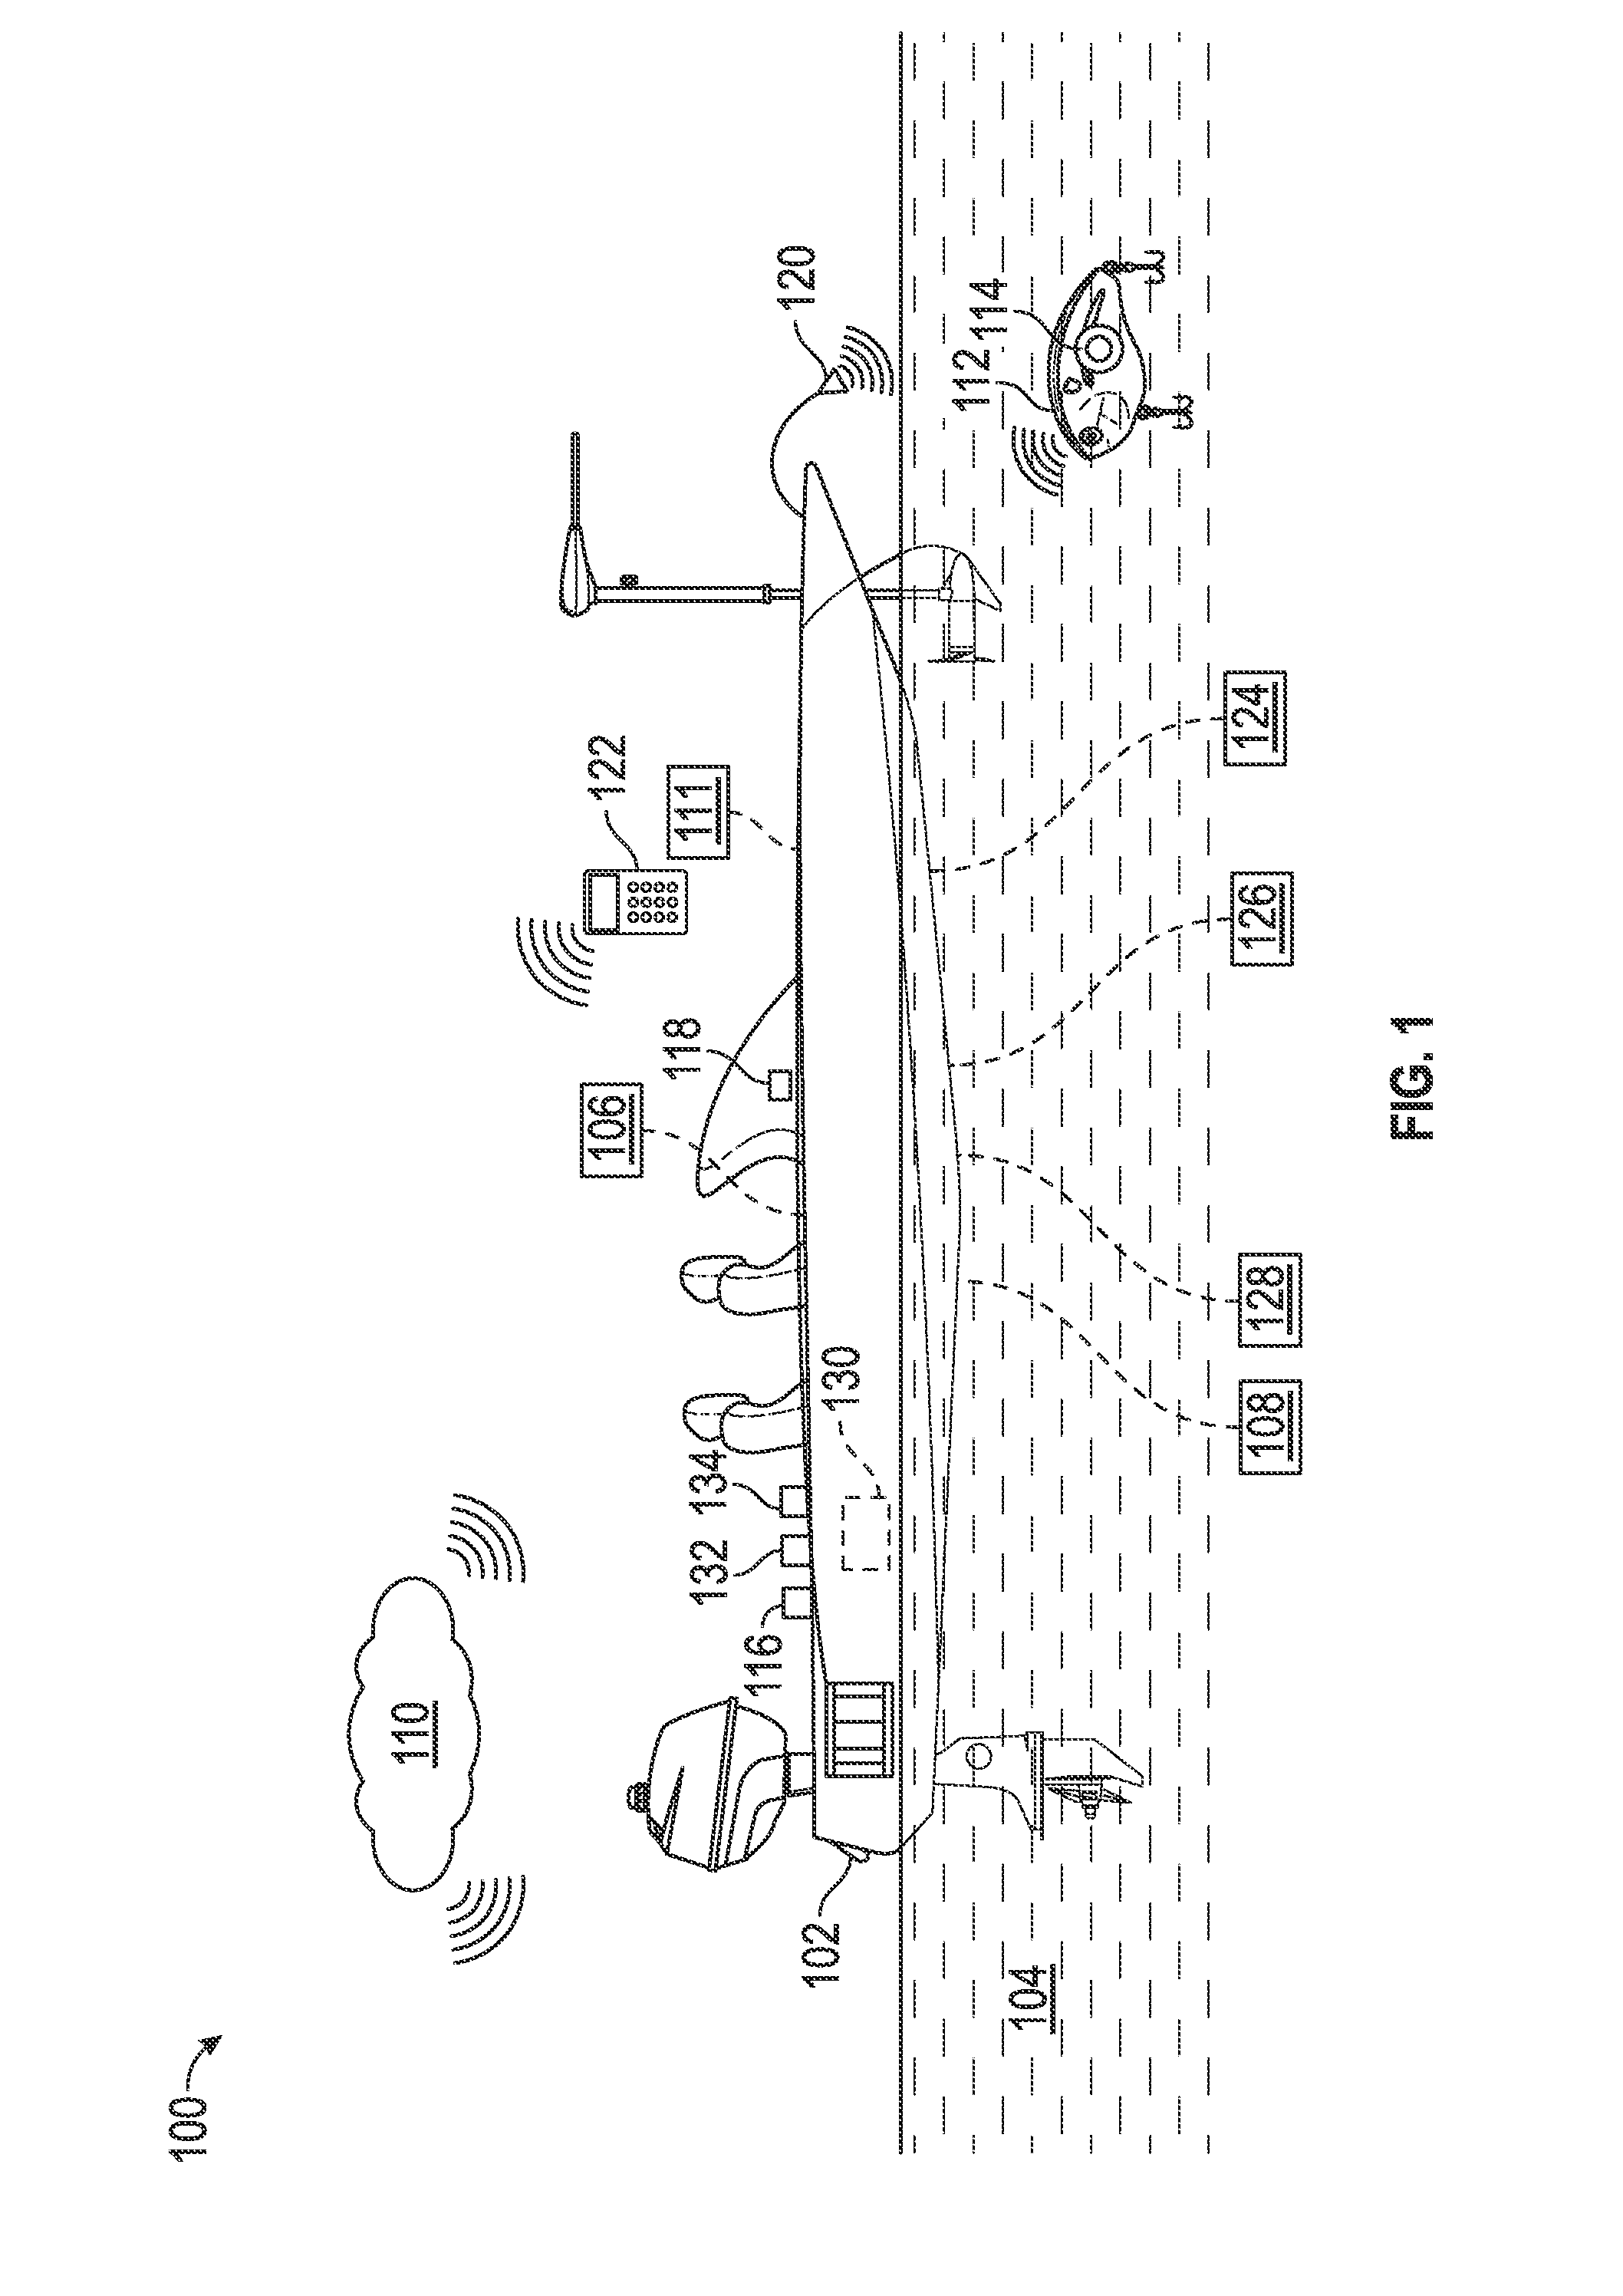 Systems and methods for monitoring and communicating fishing data